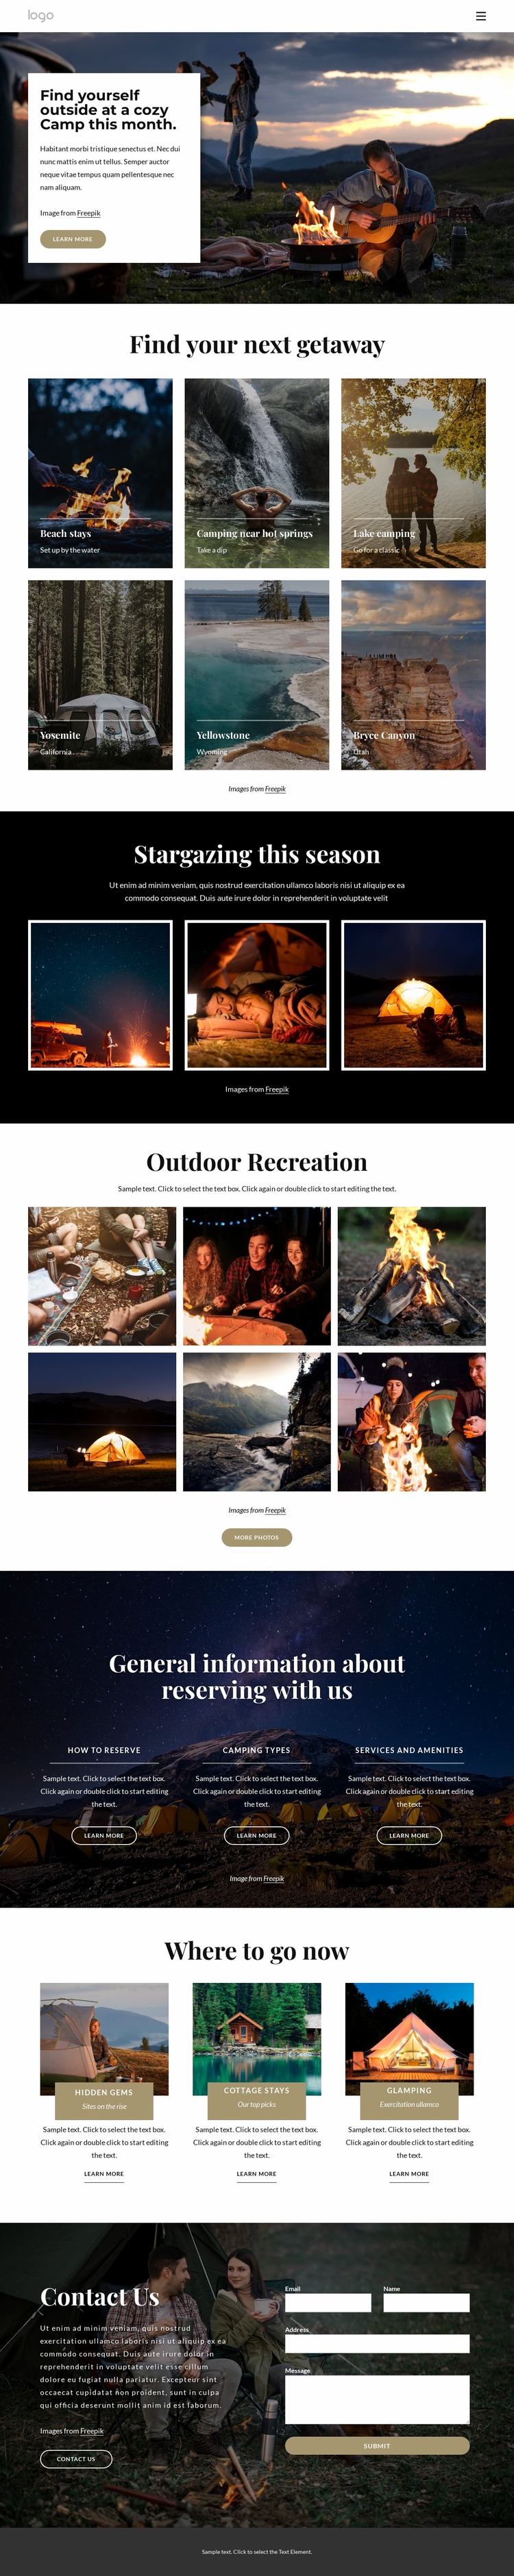 Going on a camping trip Website Mockup